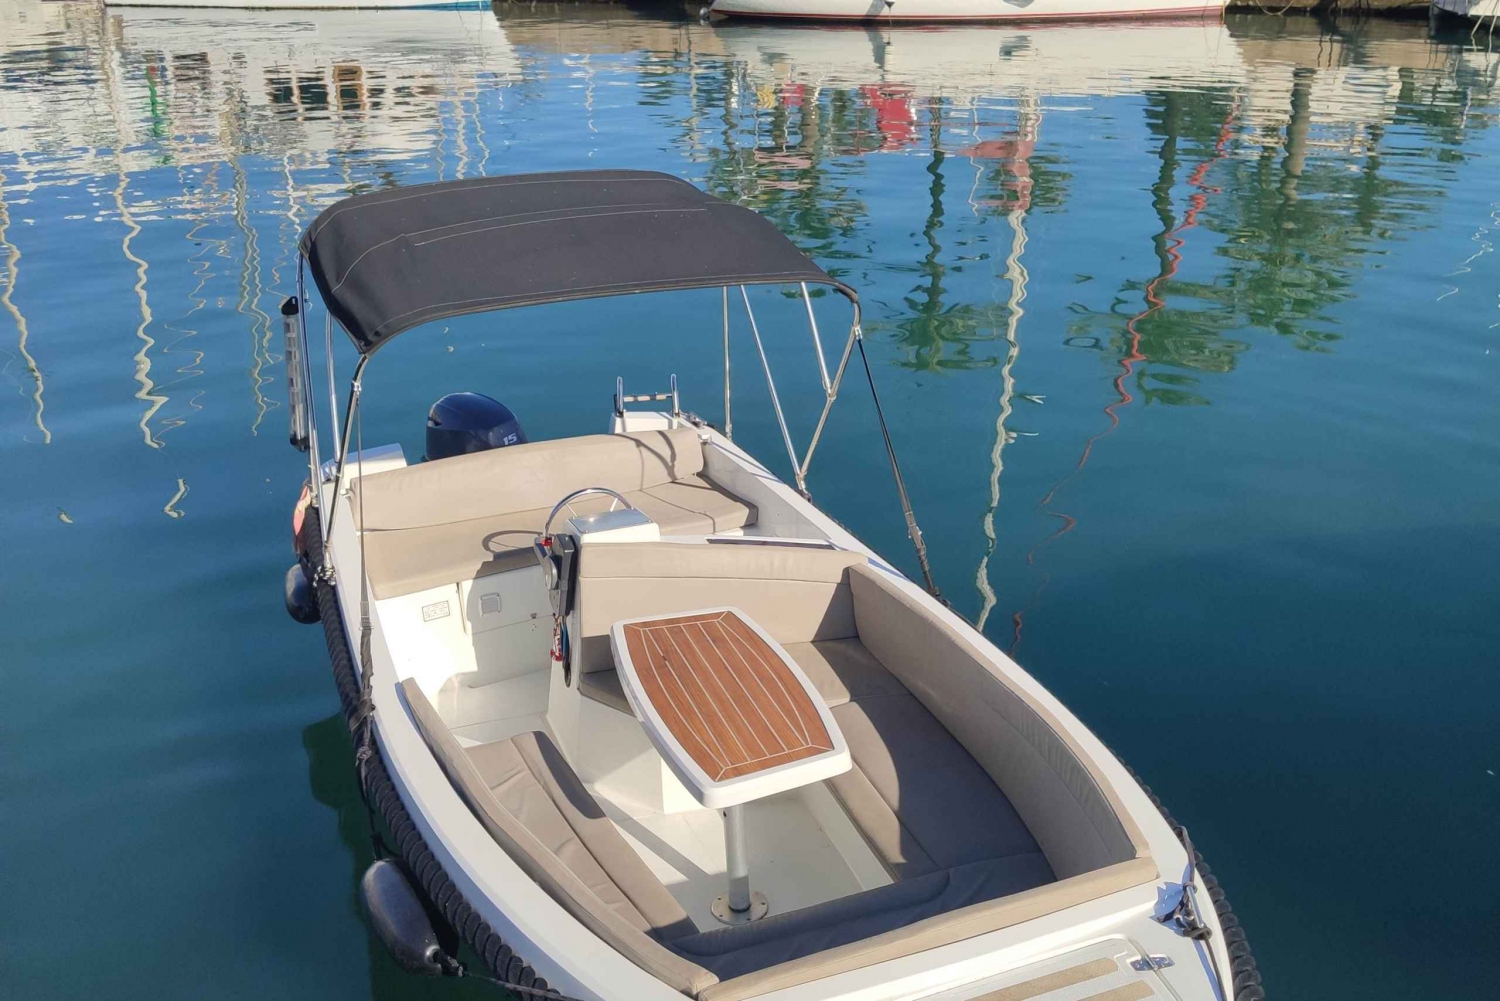 From Benalmadena: Private Boat Rental without a Boat License